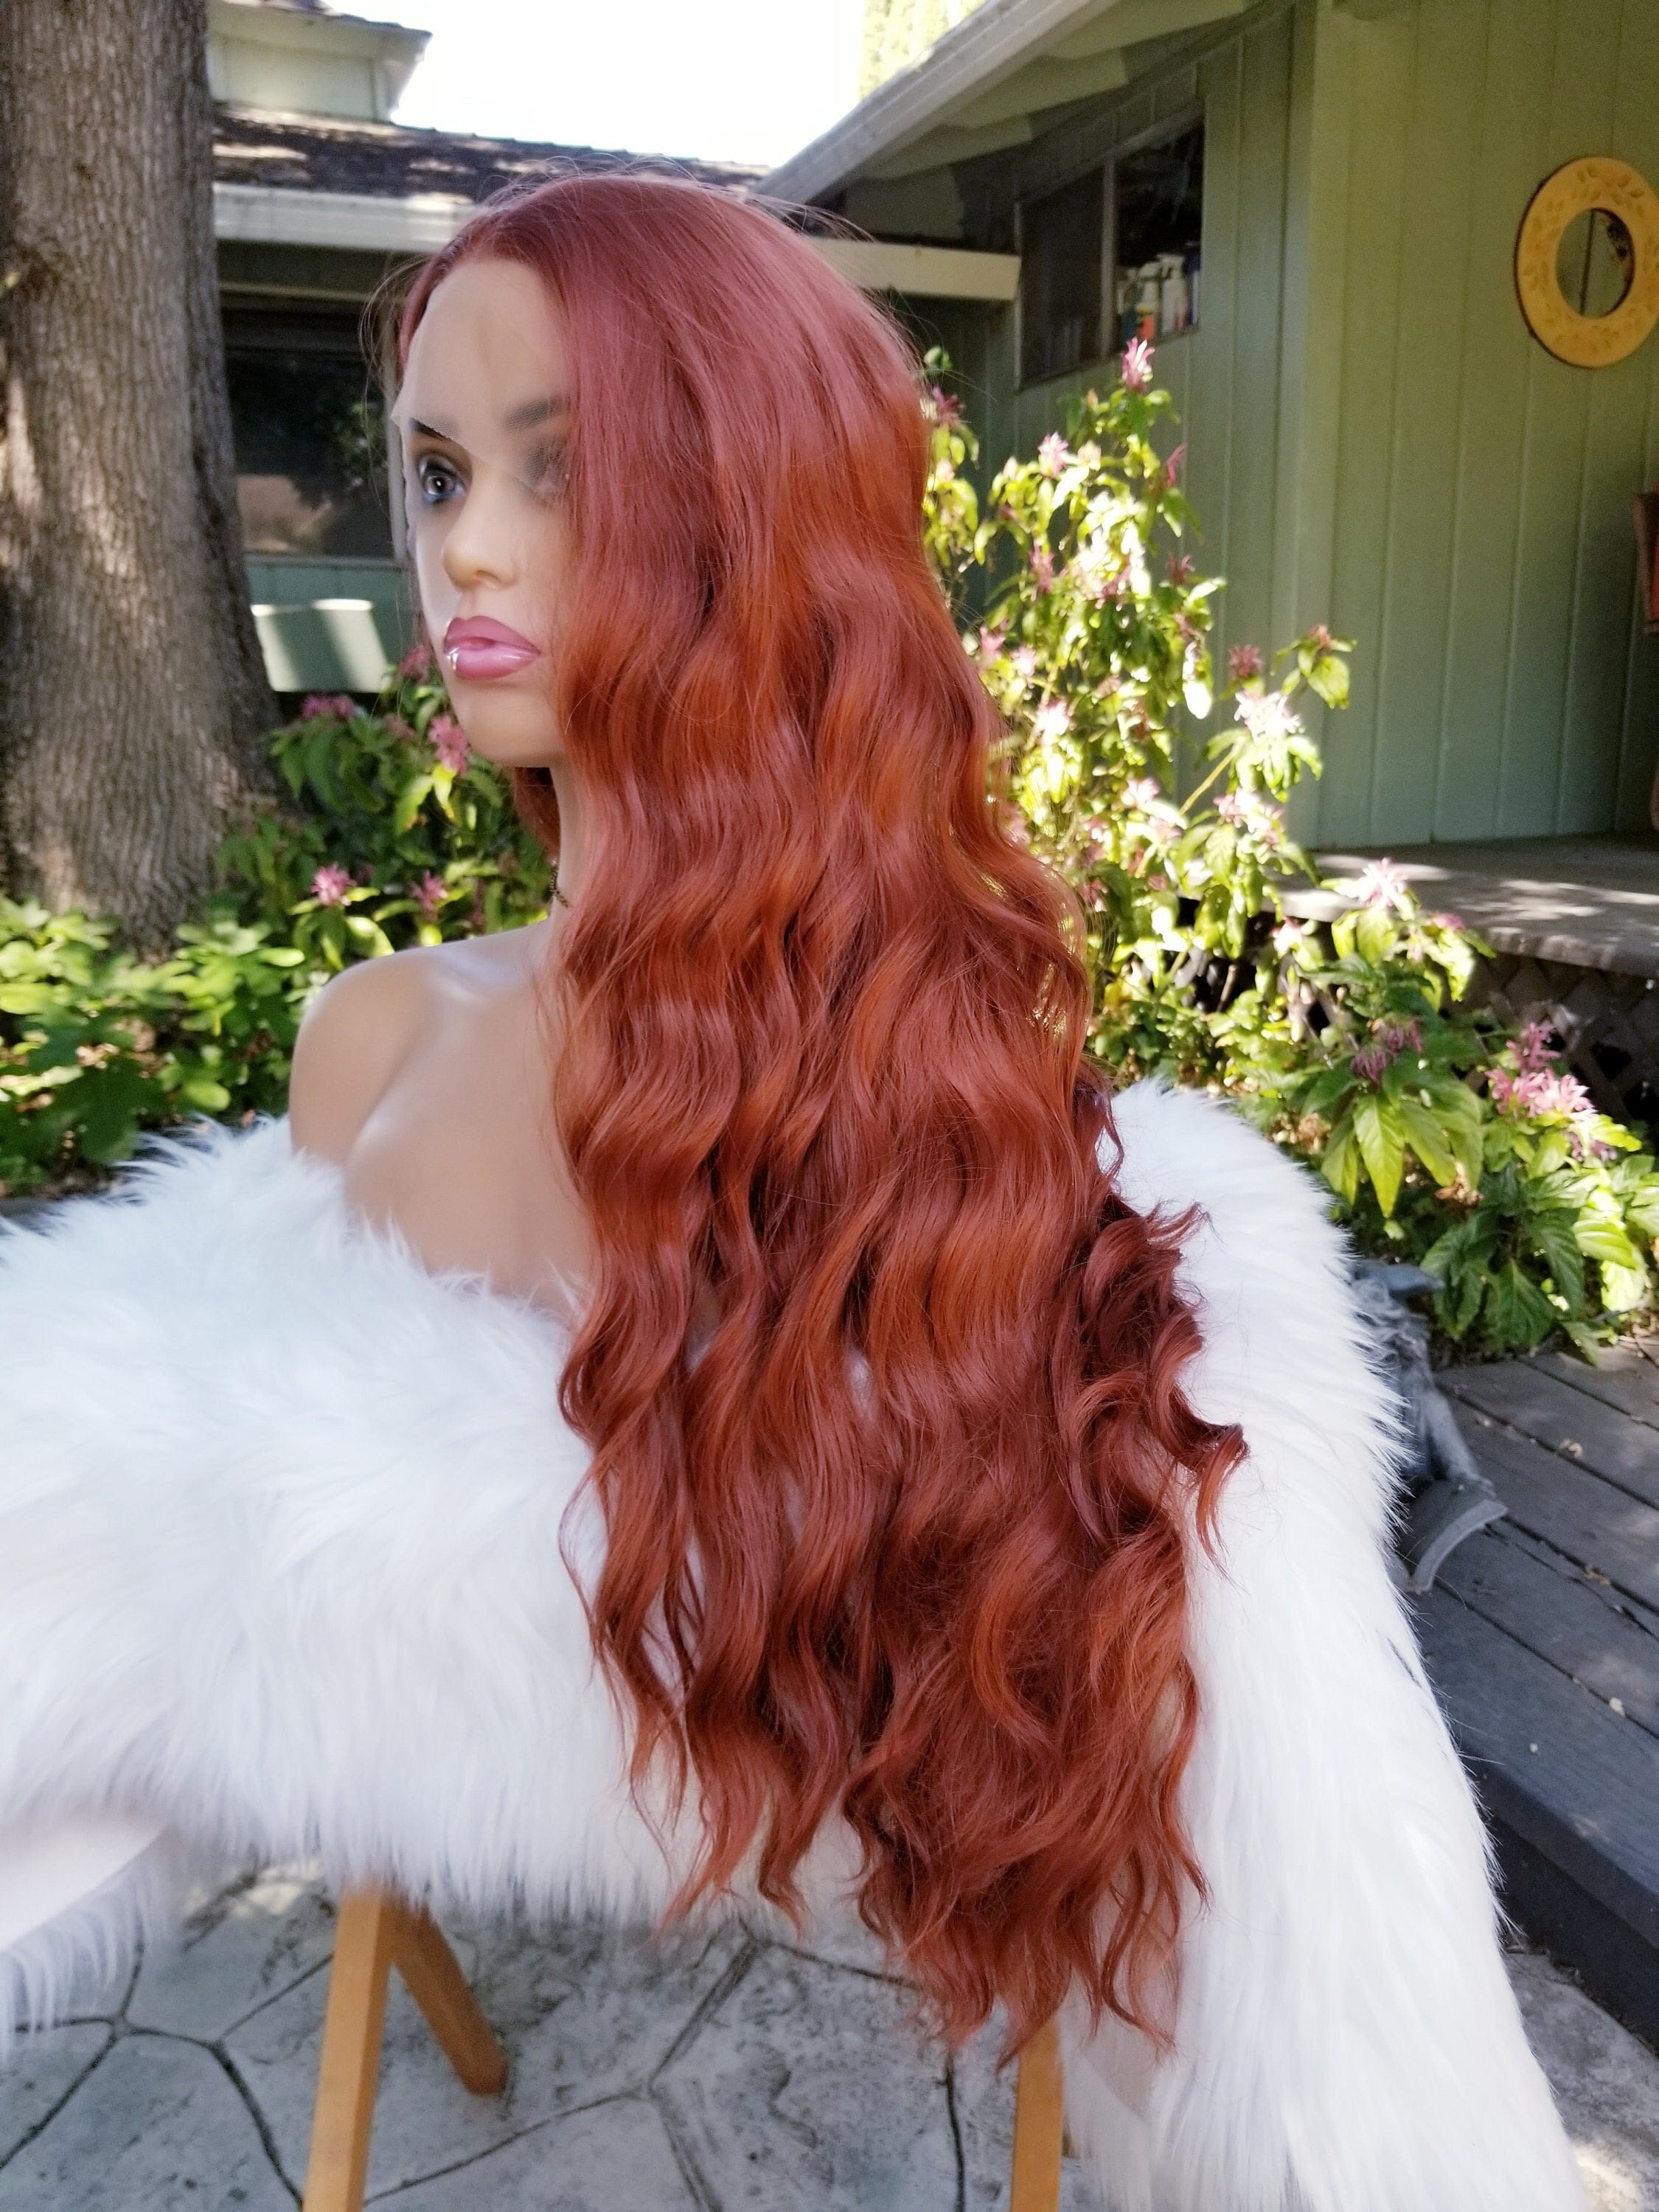 Red Lace Front Wig Long Wavy Natural Looking Cherry Red Free Part Wig  Synthetic Heat Resistant Fiber Cosplay Party Makeup Wigs for Women 24 Inch